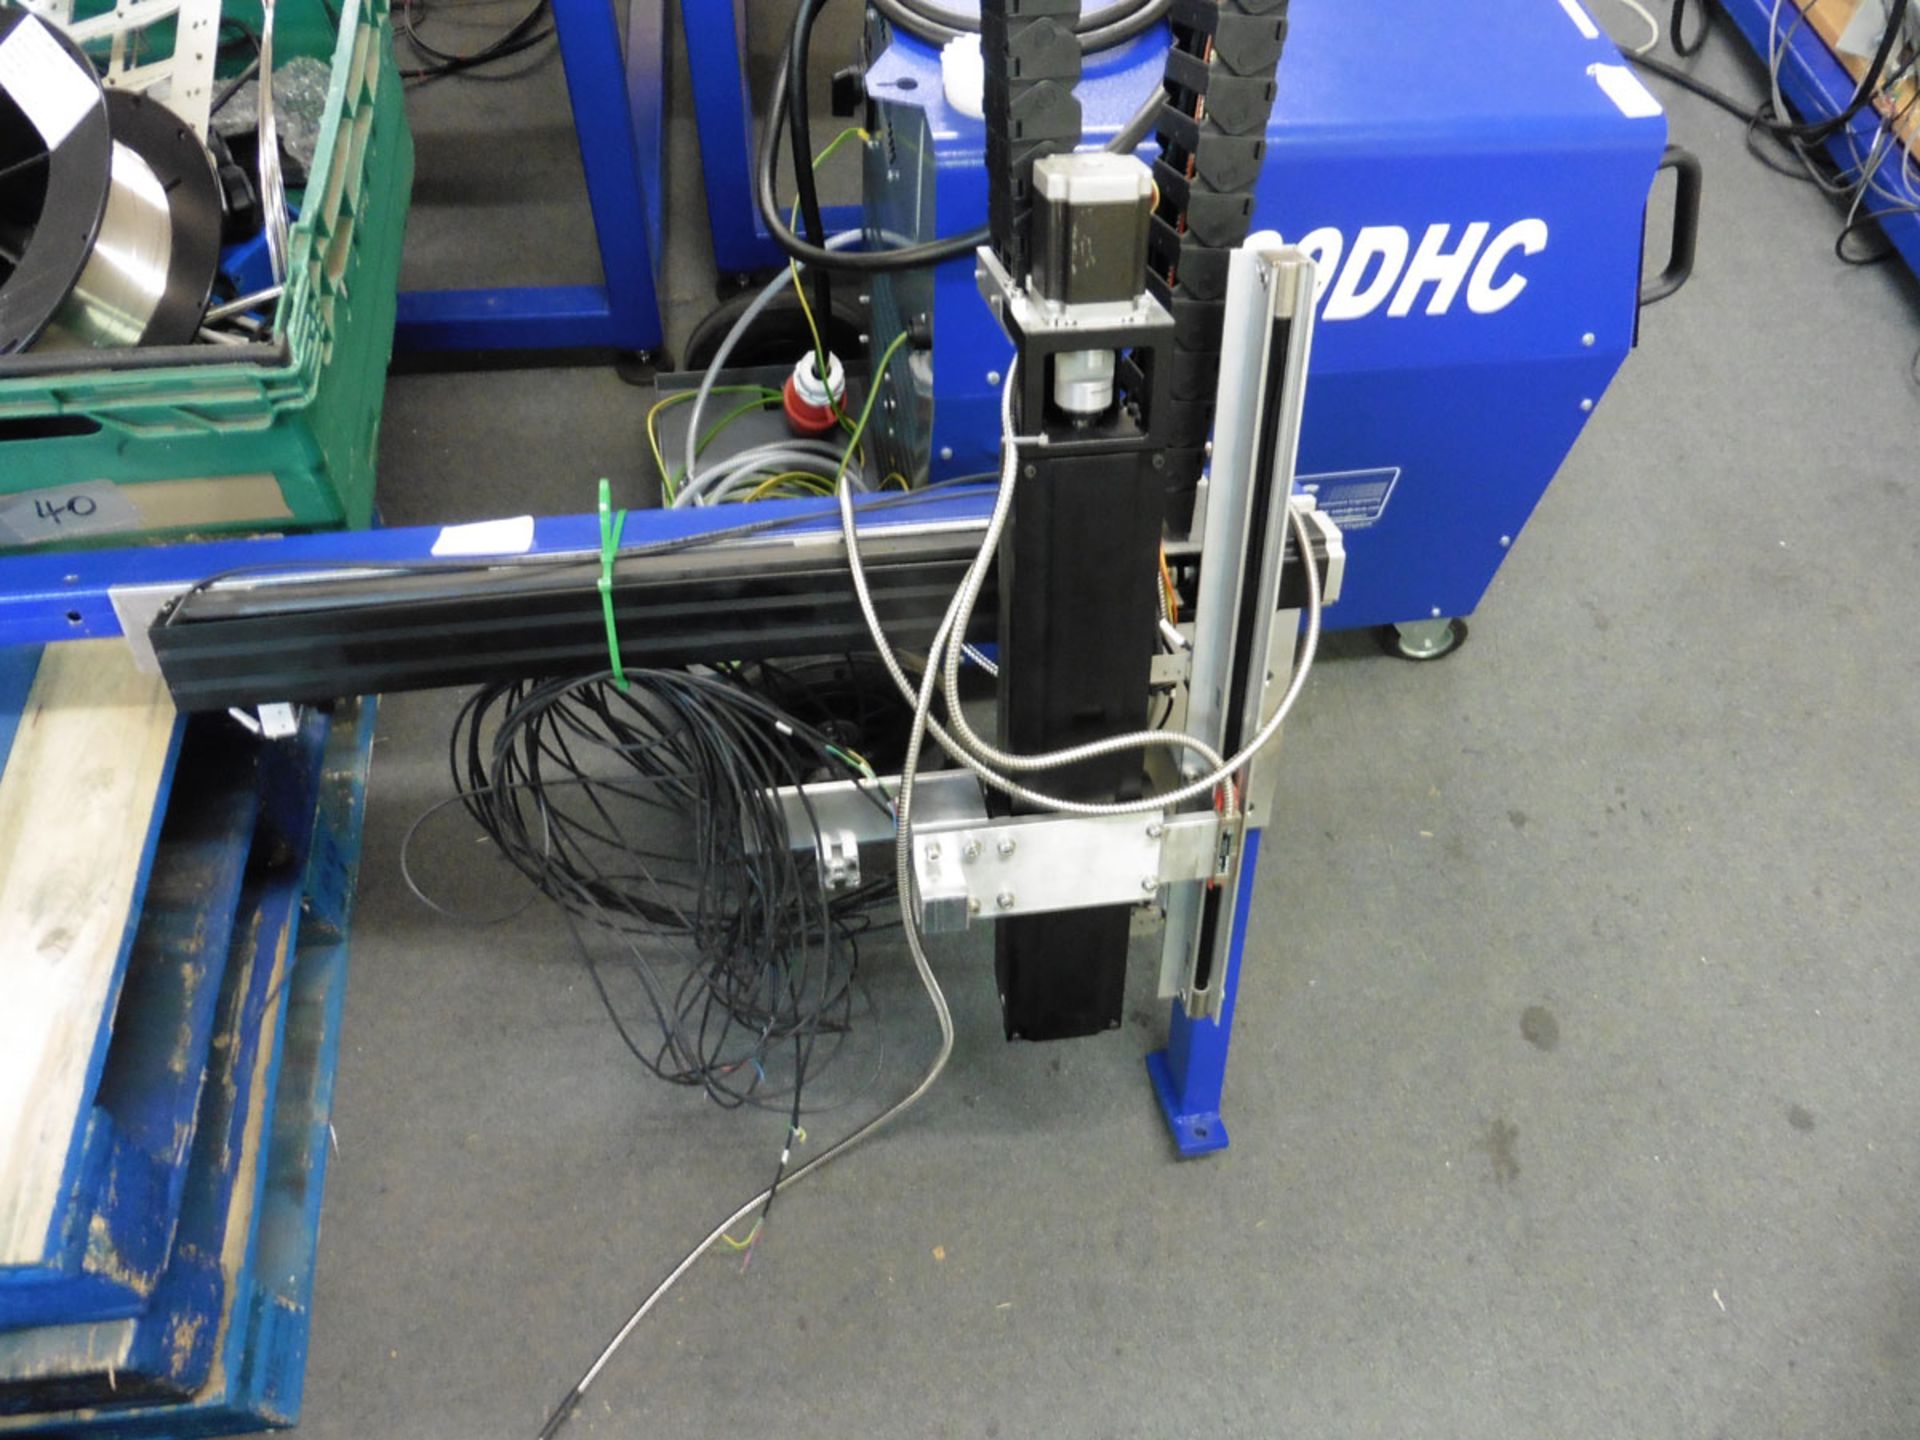 A Specialist welding jig on gantry for automated welding including welding wire decoiler, - Image 2 of 10